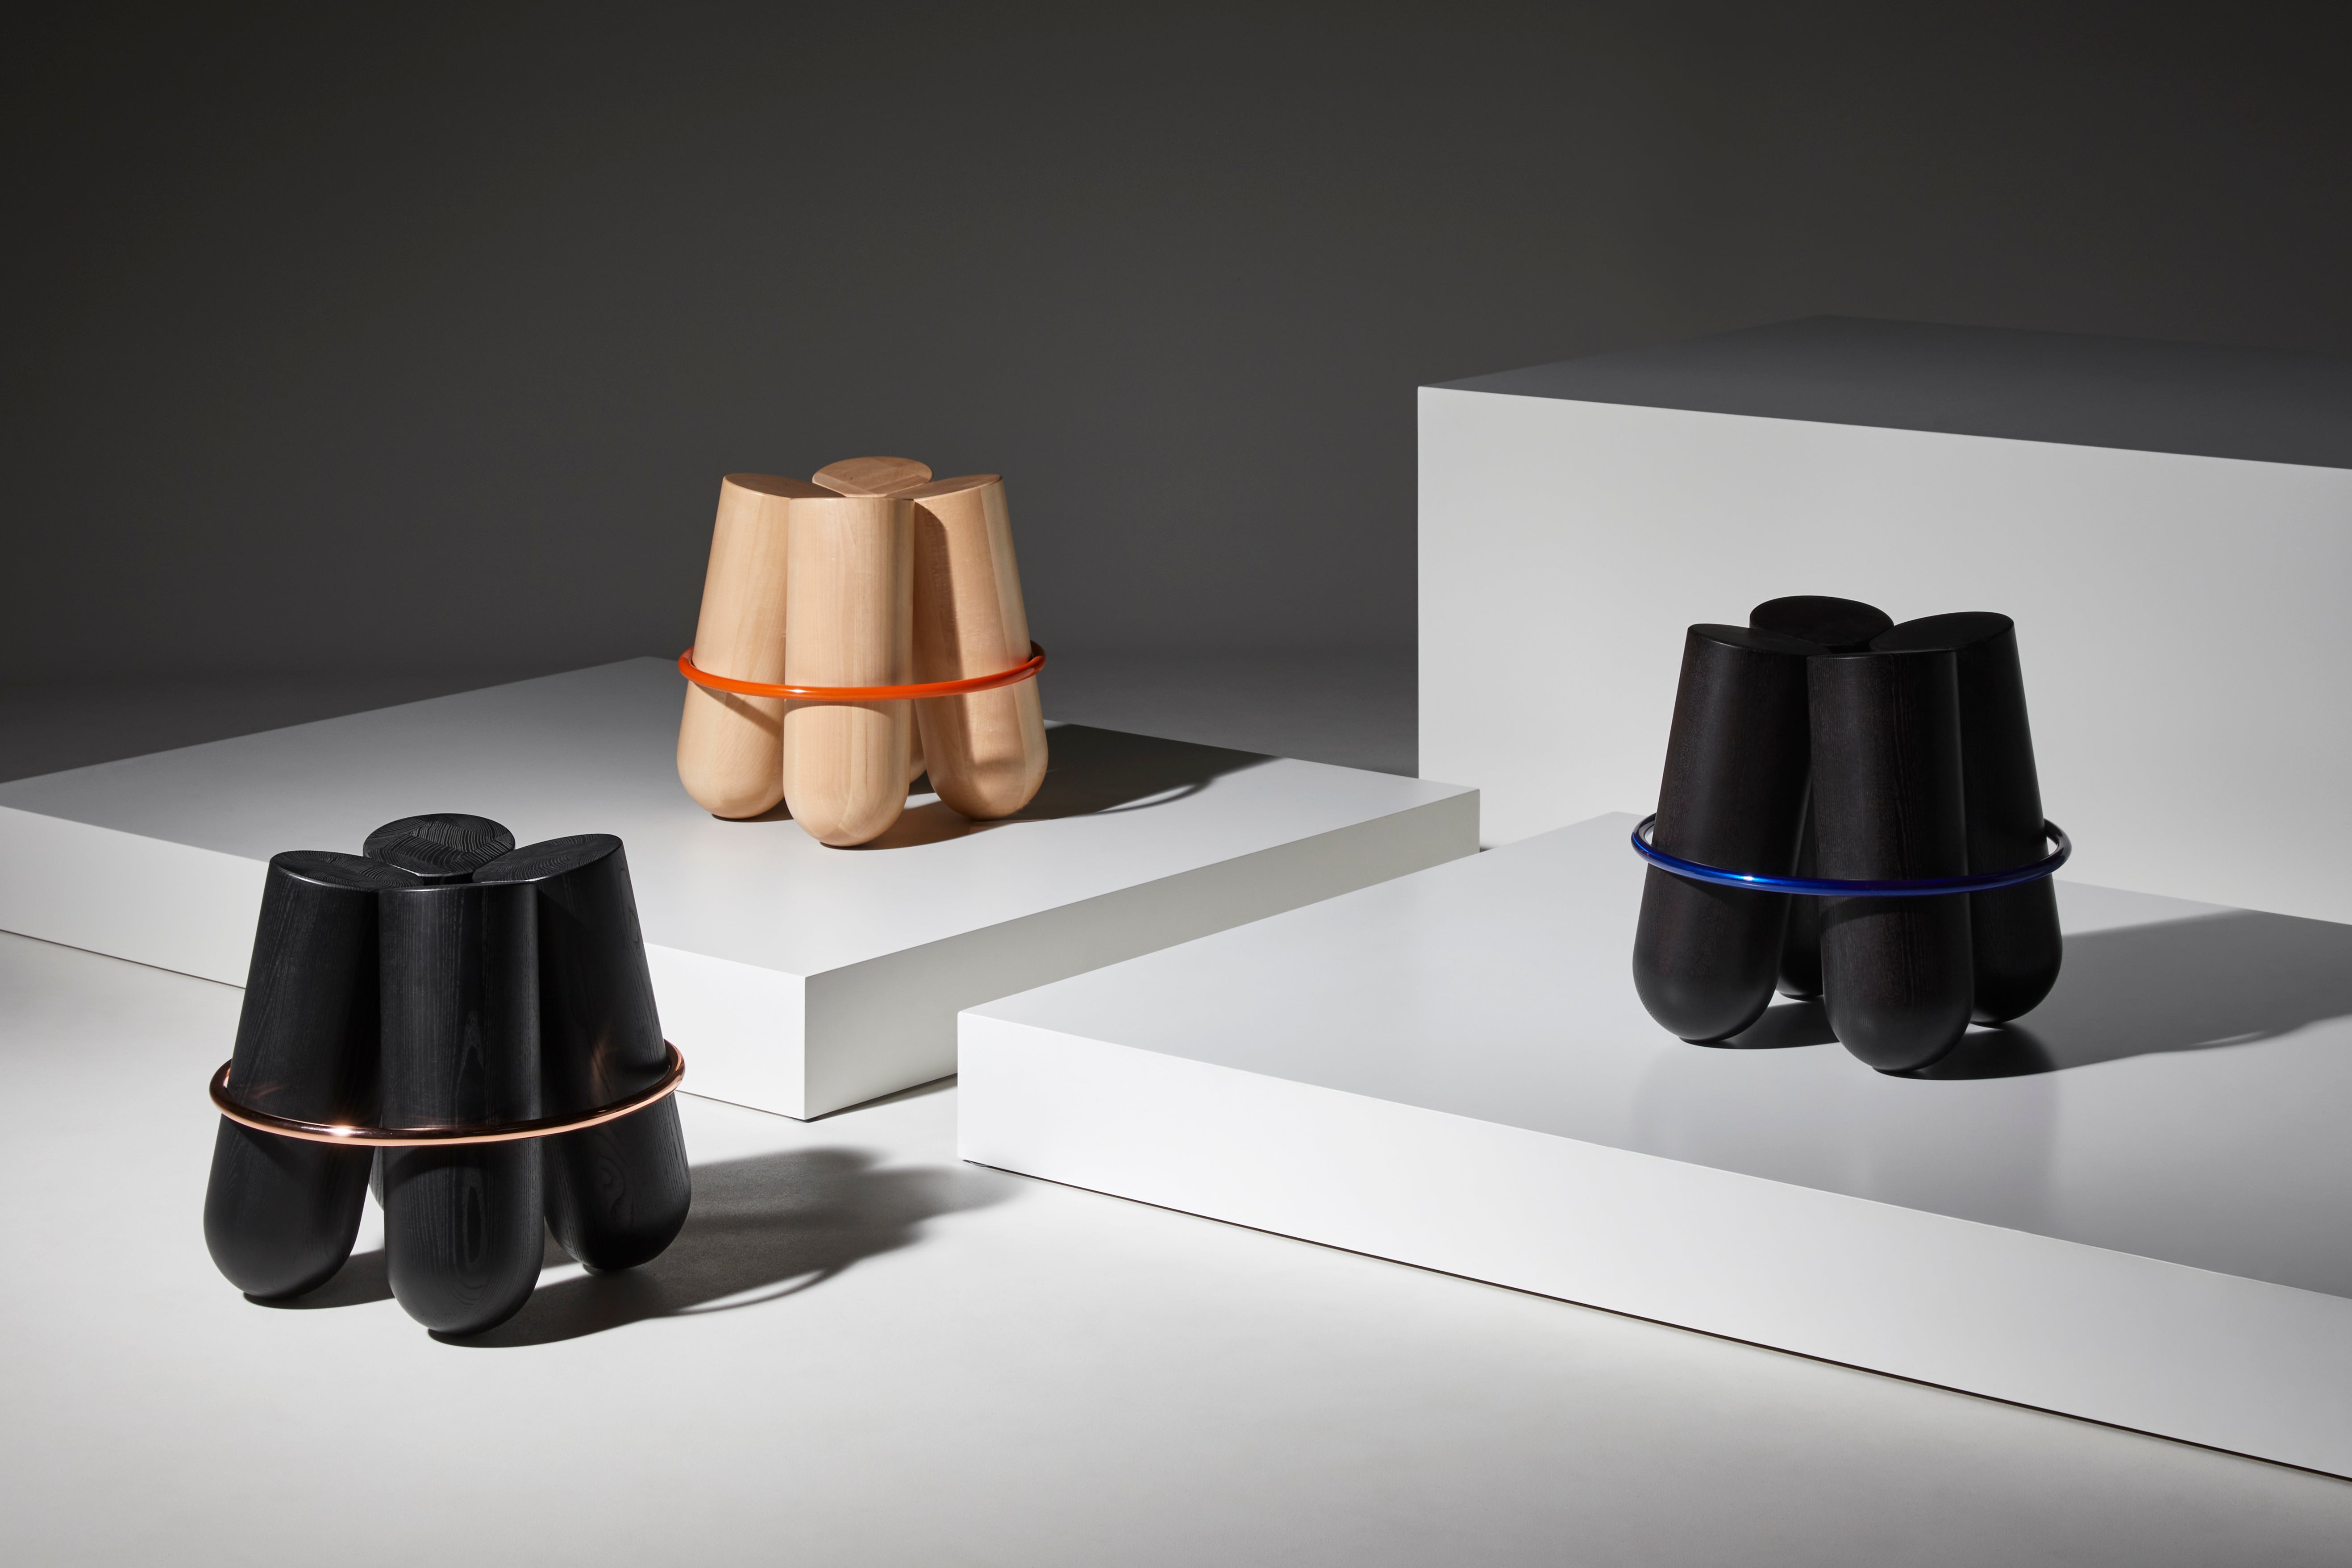 Bolt is maybe the most iconic stool of the collection. Its unique silhouette is highly recognizable with his 4 solid logs elegantly held by a contrasting metal ring. Bolt is a paradoxe: brutal and very refined at the same time. The stool is also